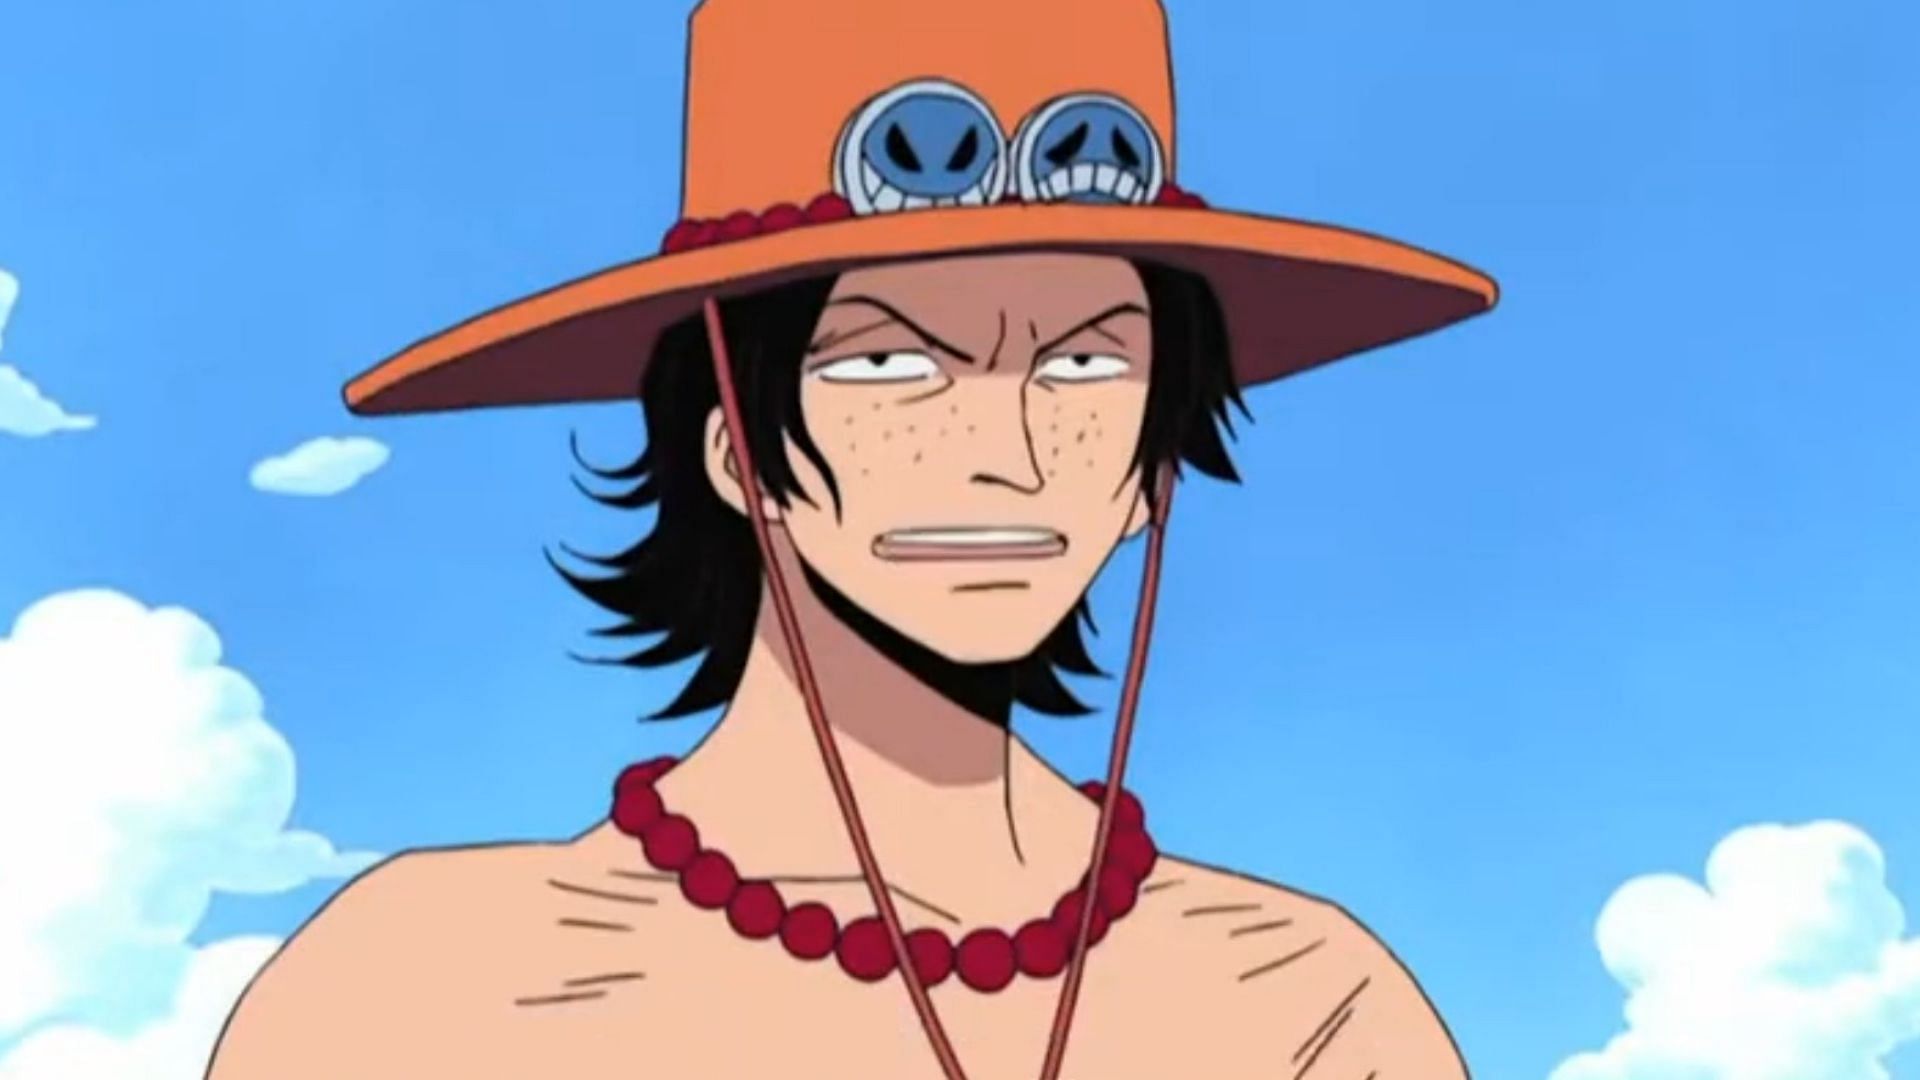 Ace as seen in the anime (Image via Toei)